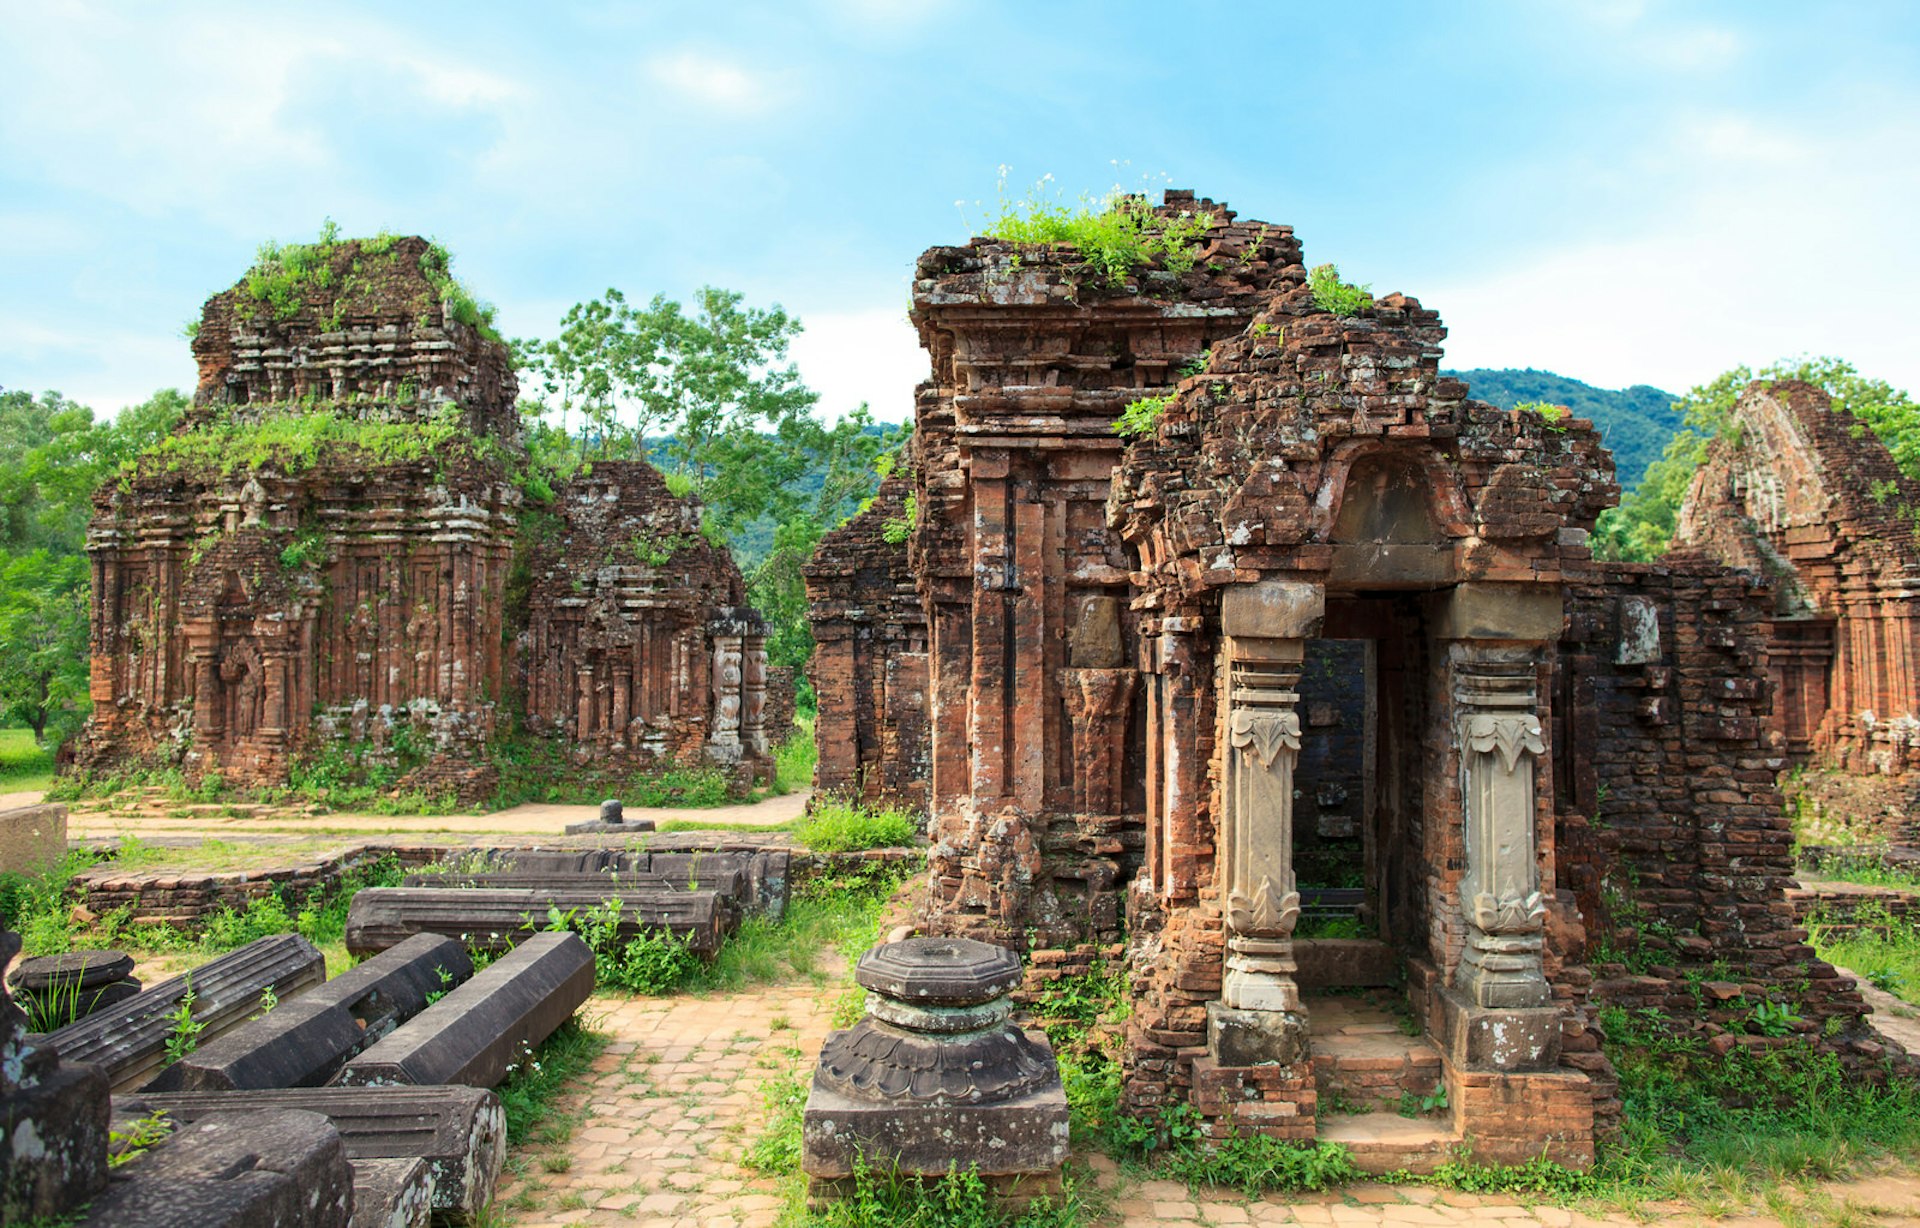 The remains of some columned temples, with plants growing from the top of them can be seen at the Cham ruins near Hoi An